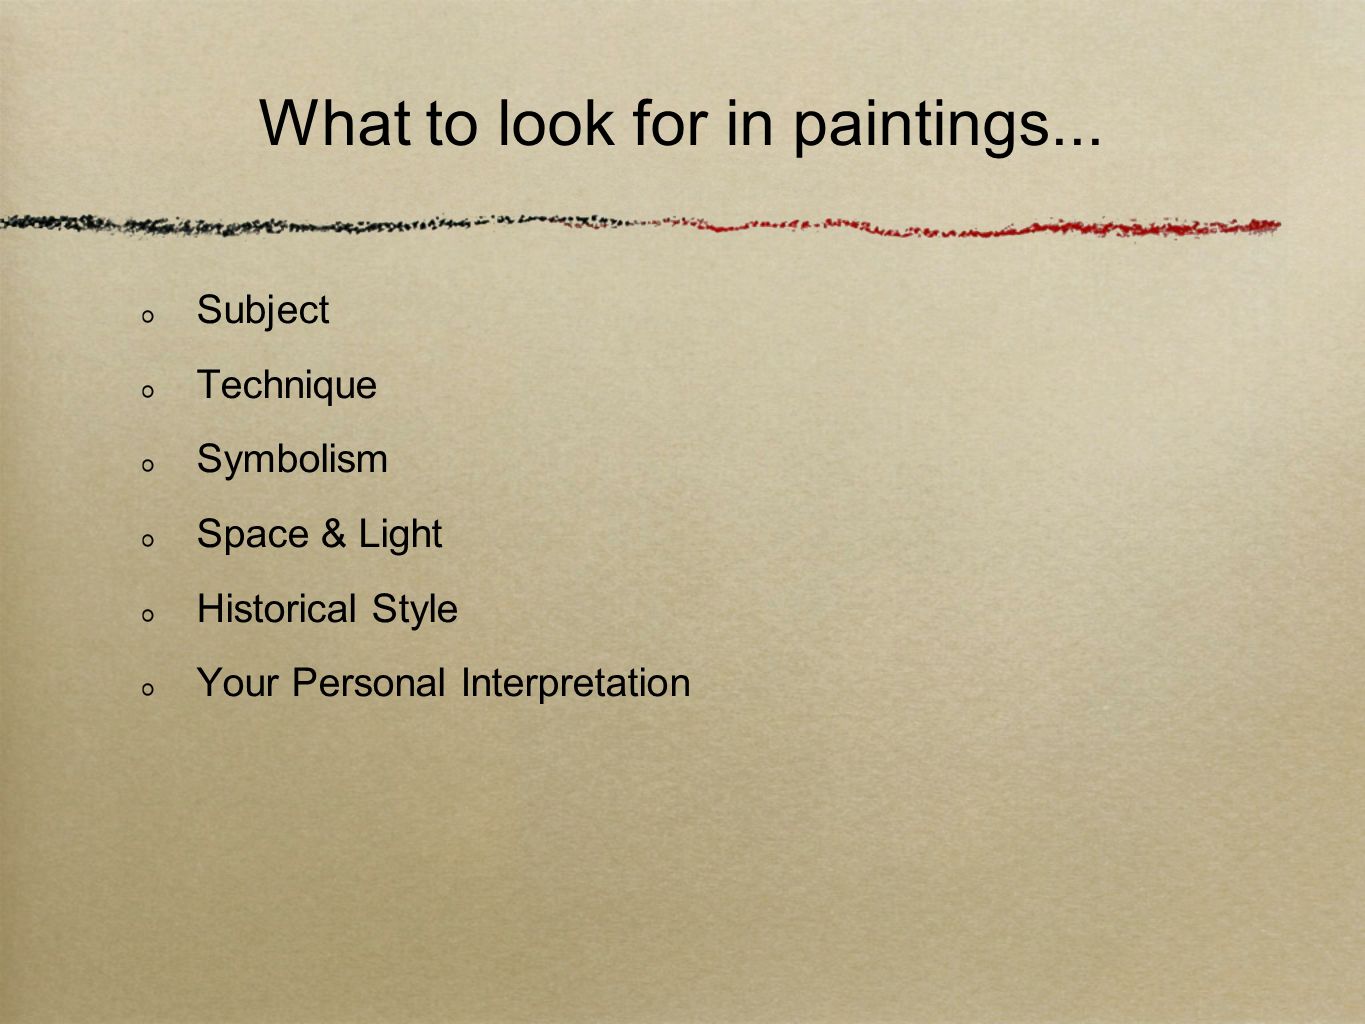 What to look for in paintings...